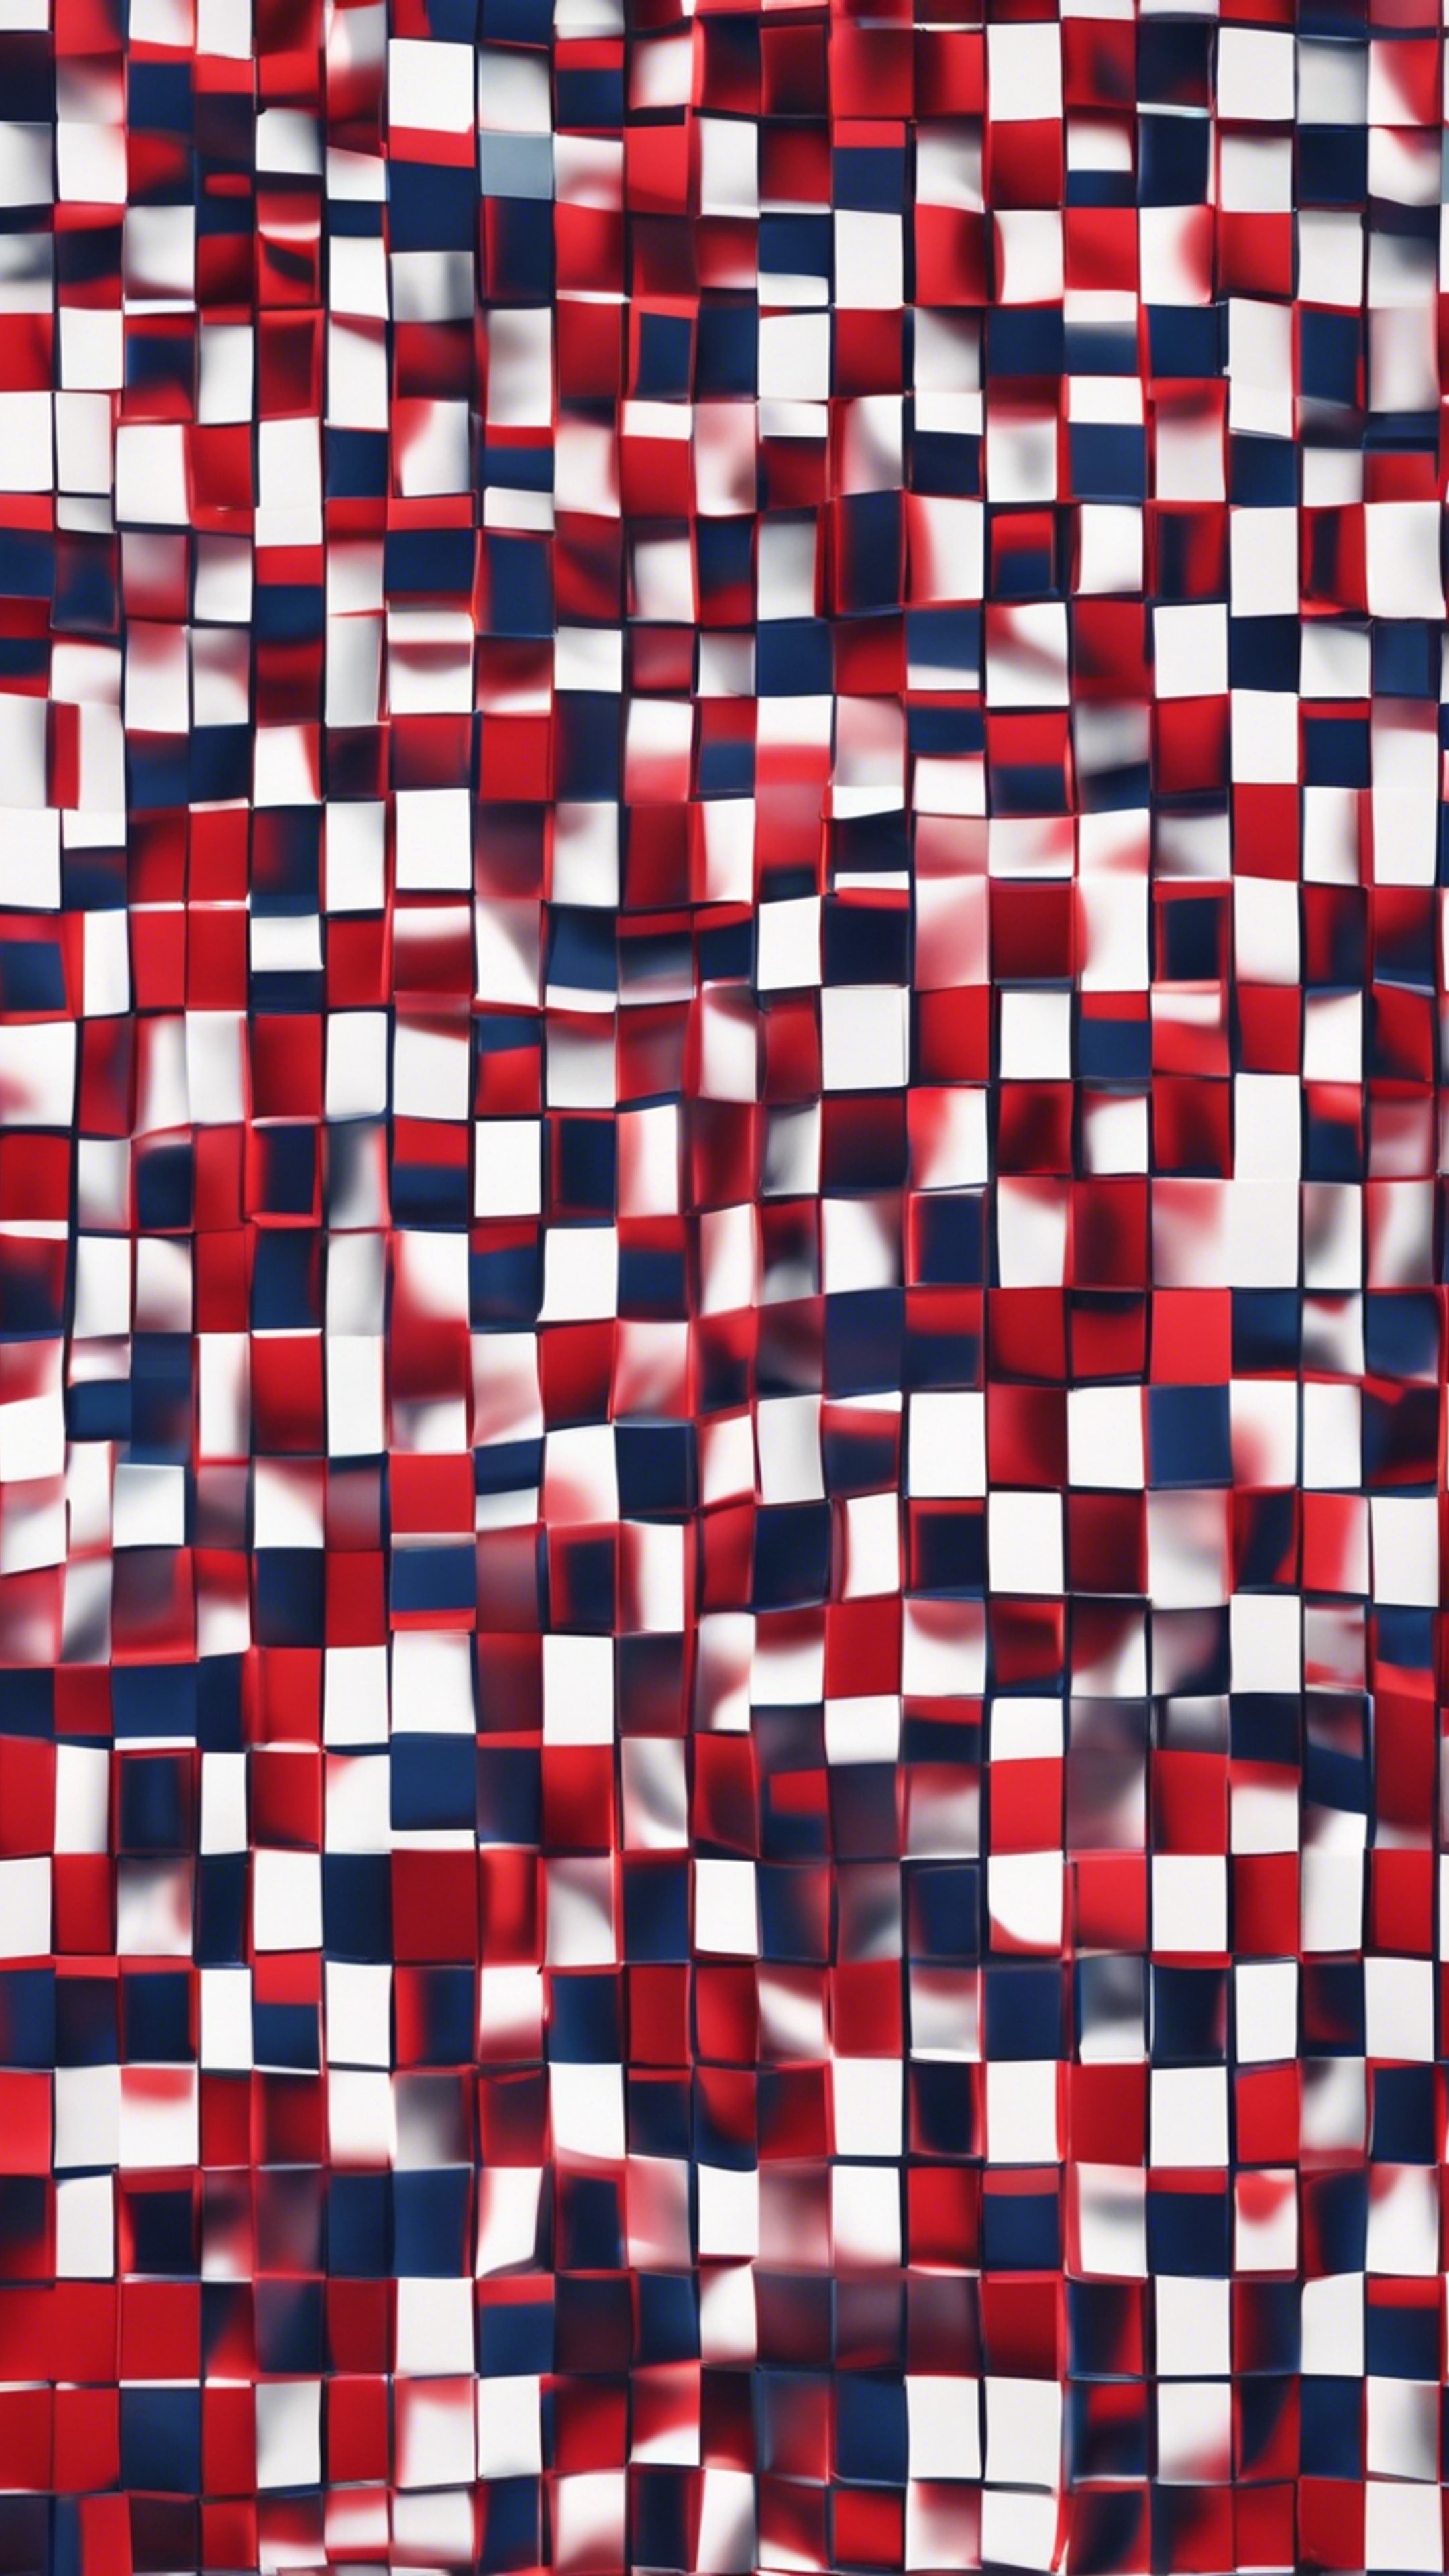 Interwoven network of red and navy squares for a checkered pattern. Wallpaper[77e778d16adf489588ab]